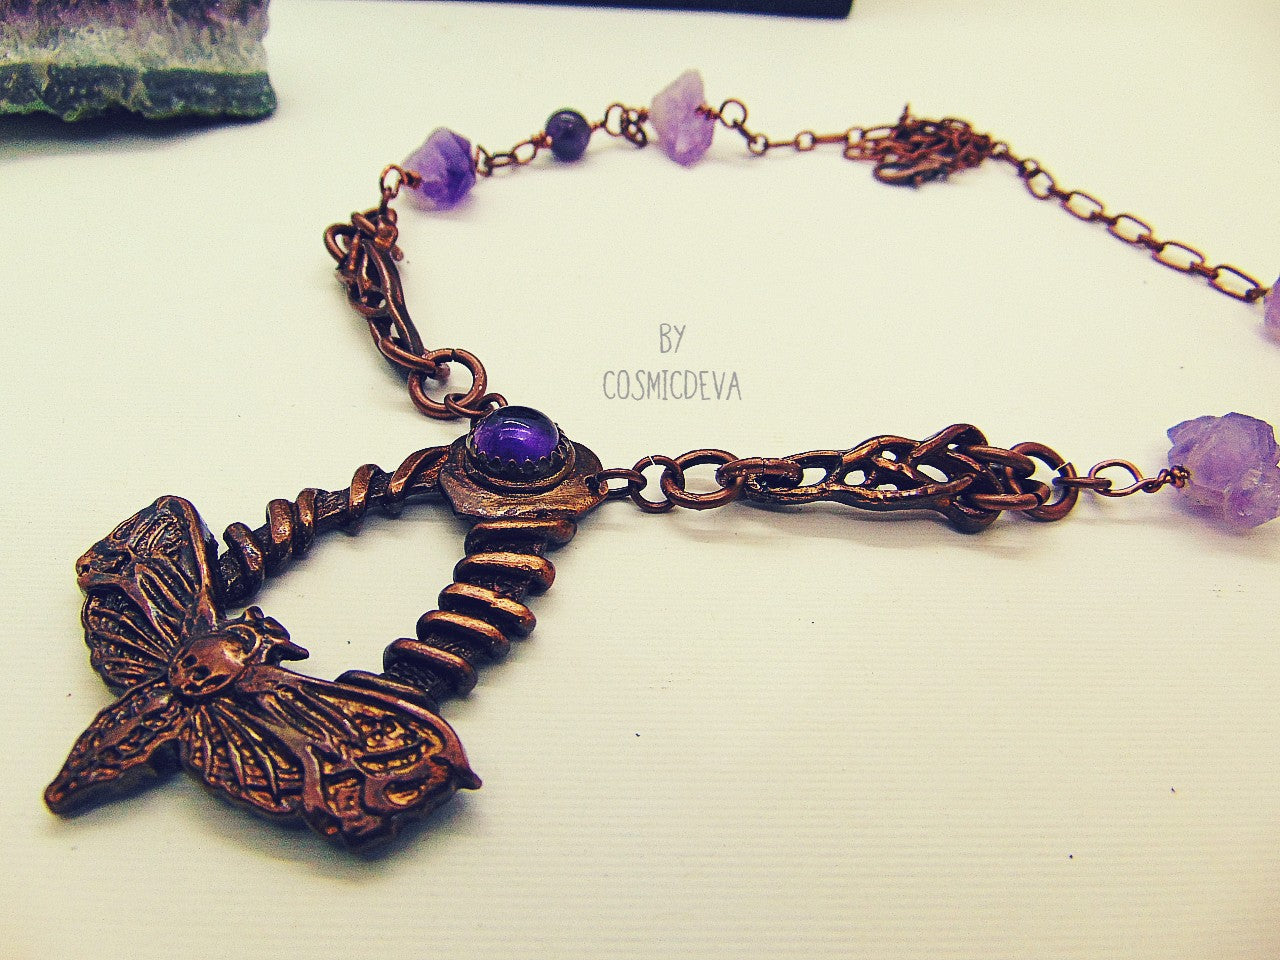 Handcrafted detailed death head hawk Moth (Acherontia) made of solid copper with a natural amethyst cabochon setting. The pendant is the focal point of a chain necklace with drilled natural raw amethyst gemstones, natural amethyst round beads and two completely handcrafted copper Celtic knot design findings.